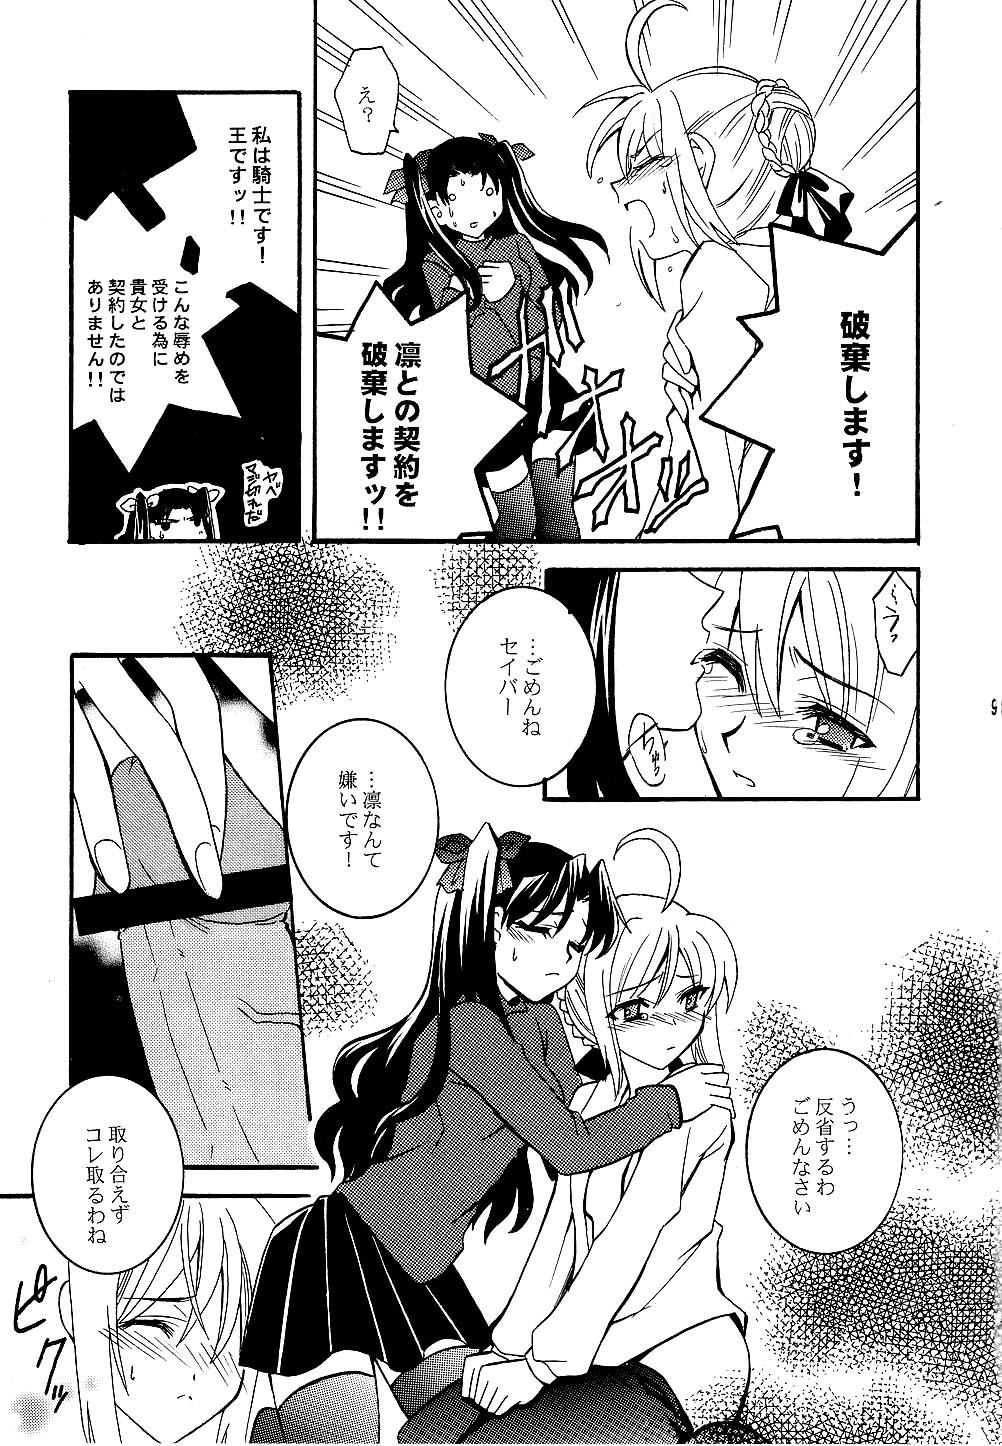 Missionary KING KILL 33 - Fate stay night Small - Page 8